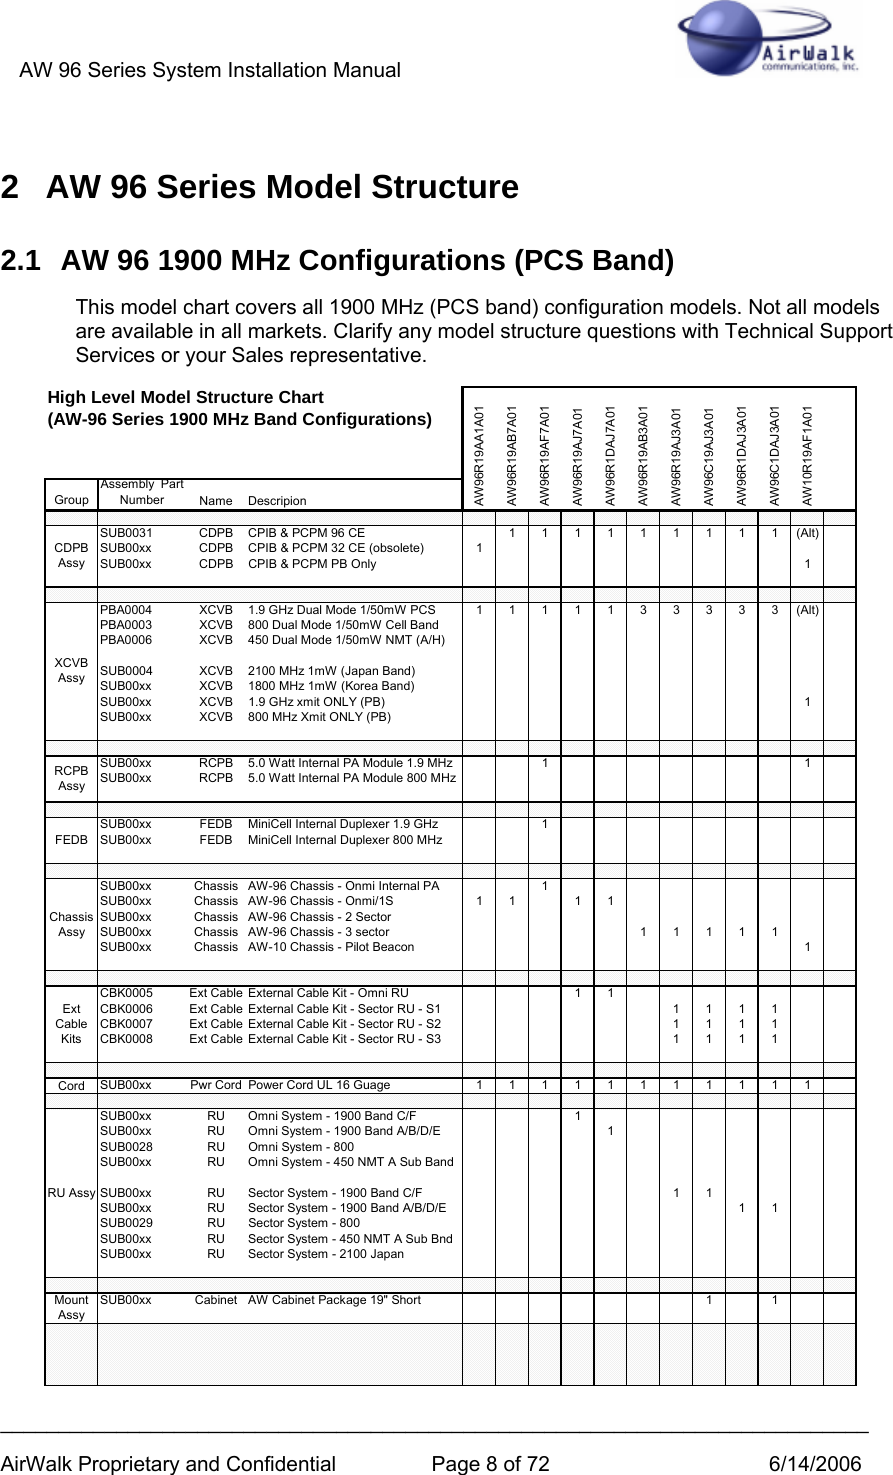 AW 96 Series System Installation Manual          ___________________________________________________________________________ AirWalk Proprietary and Confidential  Page 8 of 72  6/14/2006 2  AW 96 Series Model Structure 2.1  AW 96 1900 MHz Configurations (PCS Band) This model chart covers all 1900 MHz (PCS band) configuration models. Not all models are available in all markets. Clarify any model structure questions with Technical Support Services or your Sales representative. GroupAssembly  Part Number Name DescripionSUB0031 CDPB CPIB &amp; PCPM 96 CE 1 1 1 1 1 1 1 1 1 (Alt)SUB00xx CDPB CPIB &amp; PCPM 32 CE (obsolete) 1SUB00xx CDPB CPIB &amp; PCPM PB Only 1PBA0004 XCVB 1.9 GHz Dual Mode 1/50mW PCS 1 1 1 1 1 3 3 3 3 3 (Alt)PBA0003 XCVB 800 Dual Mode 1/50mW Cell BandPBA0006 XCVB 450 Dual Mode 1/50mW NMT (A/H)SUB0004 XCVB 2100 MHz 1mW (Japan Band)SUB00xx XCVB 1800 MHz 1mW (Korea Band)SUB00xx XCVB 1.9 GHz xmit ONLY (PB) 1SUB00xx XCVB 800 MHz Xmit ONLY (PB)SUB00xx RCPB 5.0 Watt Internal PA Module 1.9 MHz 1 1SUB00xx RCPB 5.0 Watt Internal PA Module 800 MHzSUB00xx FEDB MiniCell Internal Duplexer 1.9 GHz 1SUB00xx FEDB MiniCell Internal Duplexer 800 MHzSUB00xx Chassis AW-96 Chassis - Onmi Internal PA 1SUB00xx Chassis AW-96 Chassis - Onmi/1S 1 1 1 1SUB00xx Chassis AW-96 Chassis - 2 SectorSUB00xx Chassis AW-96 Chassis - 3 sector 1 1 1 1 1SUB00xx Chassis AW-10 Chassis - Pilot Beacon 1CBK0005 Ext Cable External Cable Kit - Omni RU 1 1CBK0006 Ext Cable External Cable Kit - Sector RU - S1 1 1 1 1CBK0007 Ext Cable External Cable Kit - Sector RU - S2 1 1 1 1CBK0008 Ext Cable External Cable Kit - Sector RU - S3 1 1 1 1Cord SUB00xx Pwr Cord Power Cord UL 16 Guage 1 1 1 1 1 1 1 1 1 1 1SUB00xx RU Omni System - 1900 Band C/F 1SUB00xx RU Omni System - 1900 Band A/B/D/E 1SUB0028 RU Omni System - 800SUB00xx RU Omni System - 450 NMT A Sub BandSUB00xx RU Sector System - 1900 Band C/F 1 1SUB00xx RU Sector System - 1900 Band A/B/D/E 1 1SUB0029 RU Sector System - 800SUB00xx RU Sector System - 450 NMT A Sub BndSUB00xx RU Sector System - 2100 JapanSUB00xx Cabinet AW Cabinet Package 19&quot; Short 1 1XCVB AssyMount AssyRU AssyCDPB AssyAW96R19AA1A01AW96R19AB7A01Ext Cable KitsRCPB AssyFEDBChassis AssyHigh Level Model Structure Chart                            (AW-96 Series 1900 MHz Band Configurations)AW96C1DAJ3A01AW96R19AJ7A01AW96R19AB3A01AW96R19AJ3A01AW10R19AF1A01AW96R19AF7A01AW96R1DAJ7A01AW96R1DAJ3A01AW96C19AJ3A01 